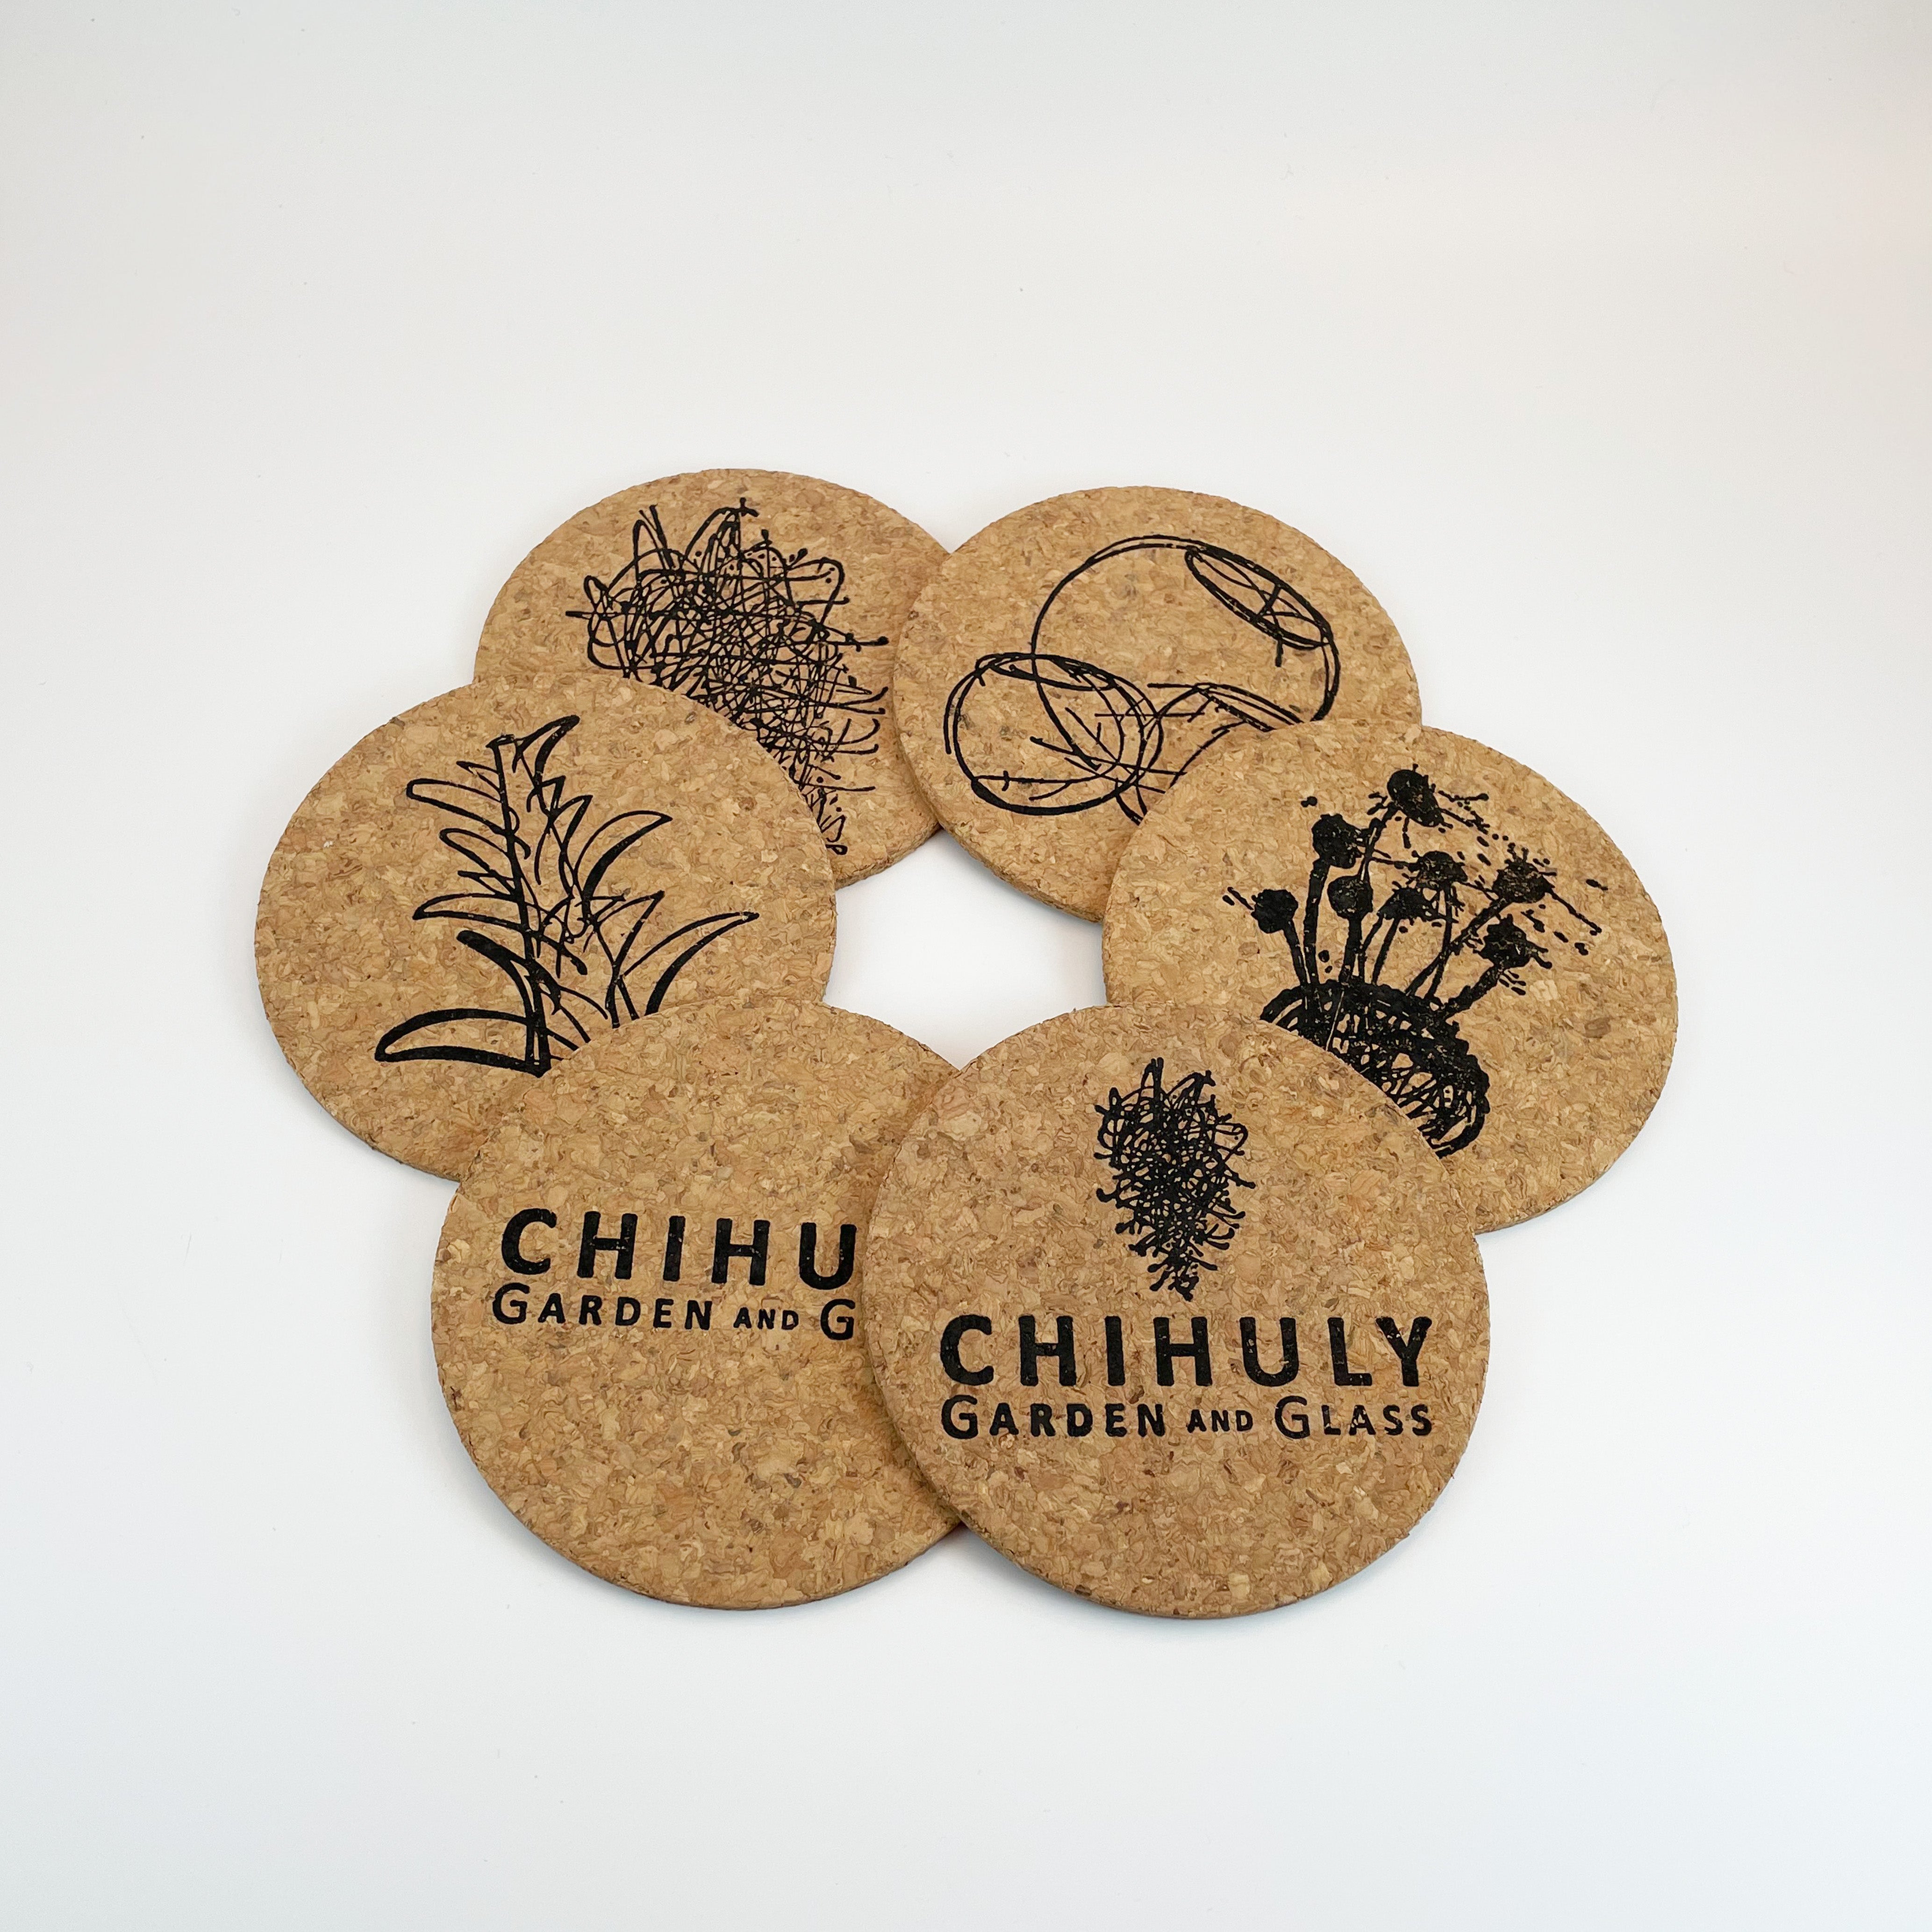 Chihuly Garden and Glass Cork Coaster Set